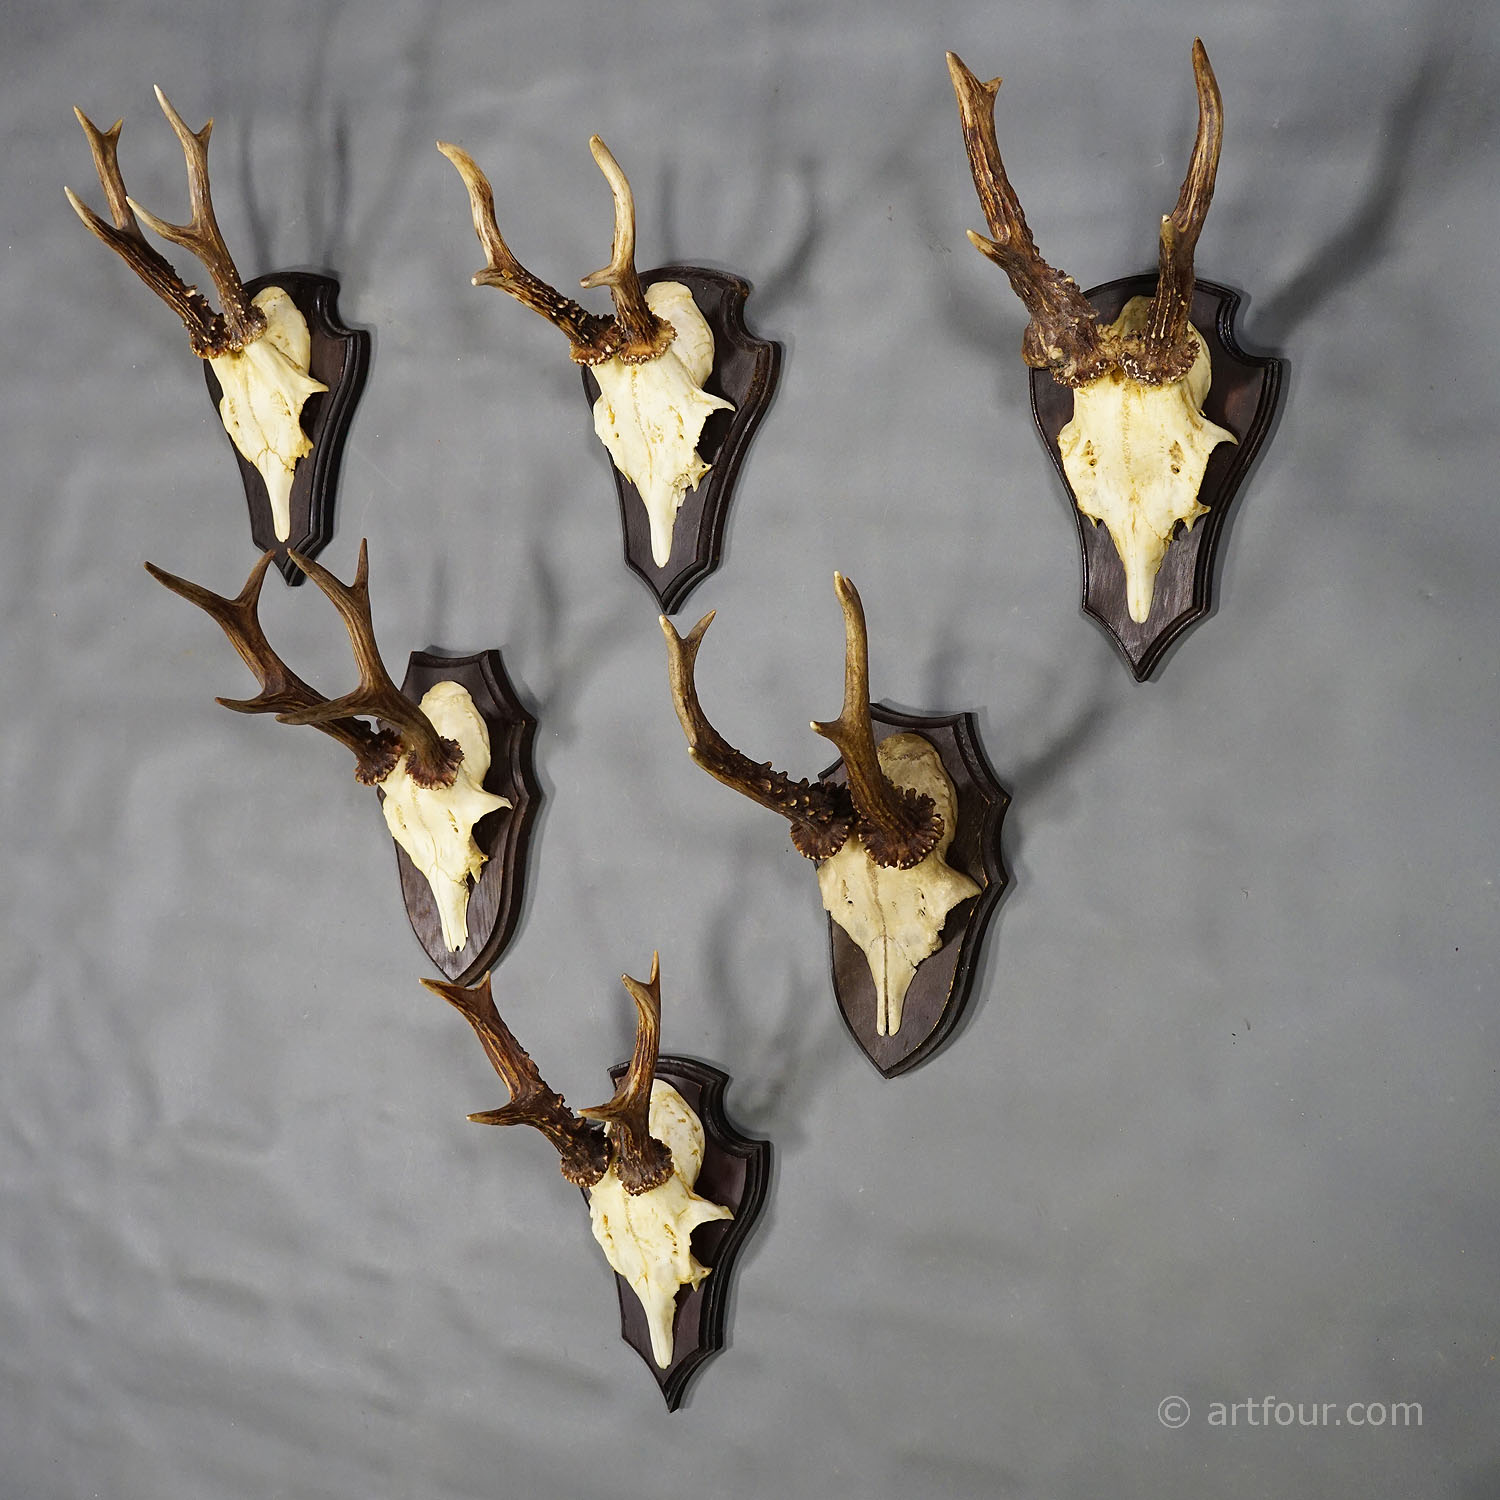 Six Large Vintage Deer Trophies on Wooden Plaques Germany ca. 1970s - 80s